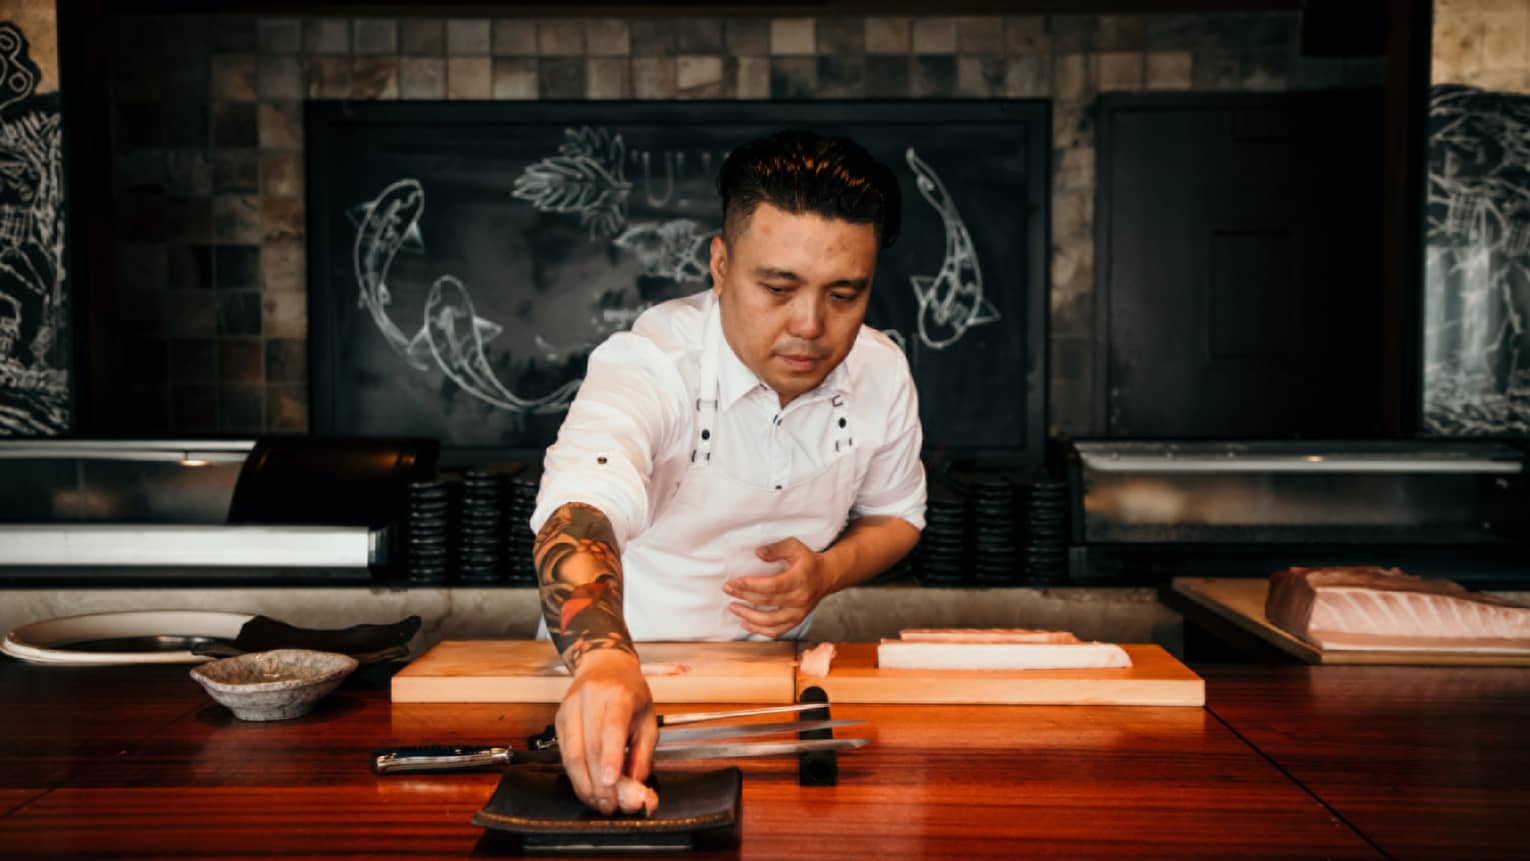 A male chef behind wooden counter places a piece of seafood on plate